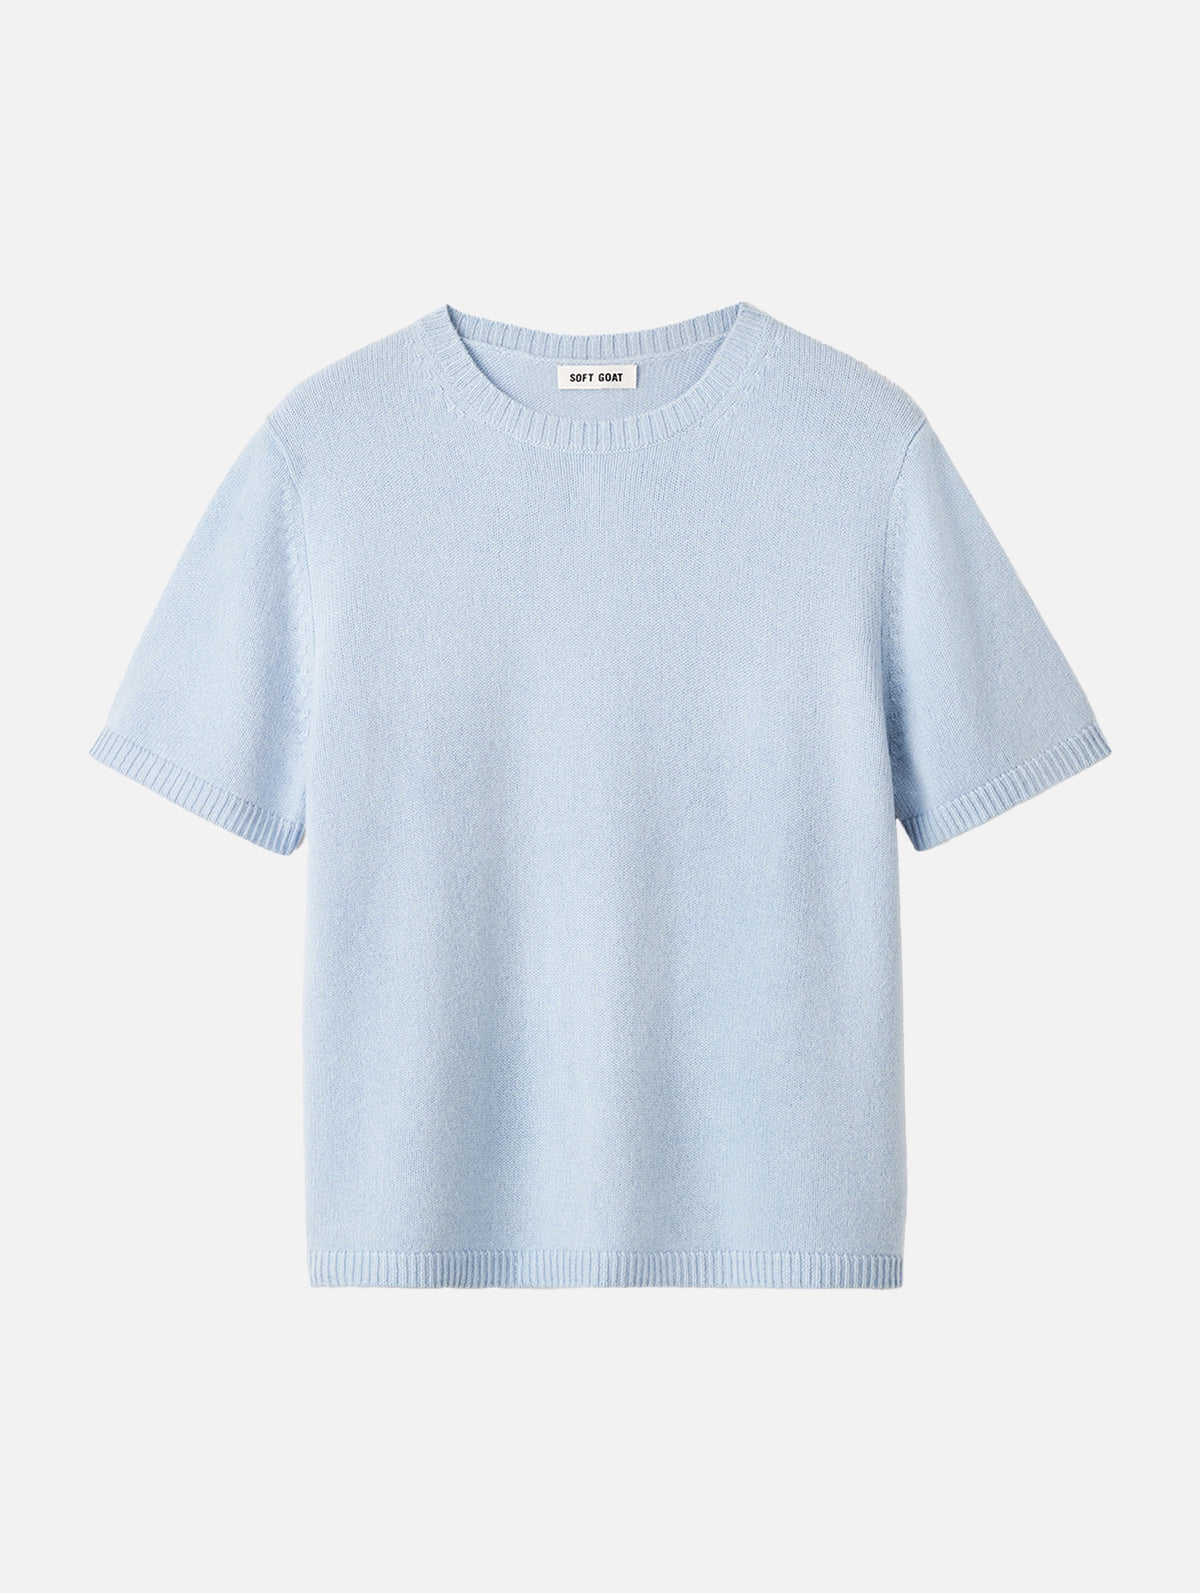 Chunky Cashmere T-Shirt in Light Blue